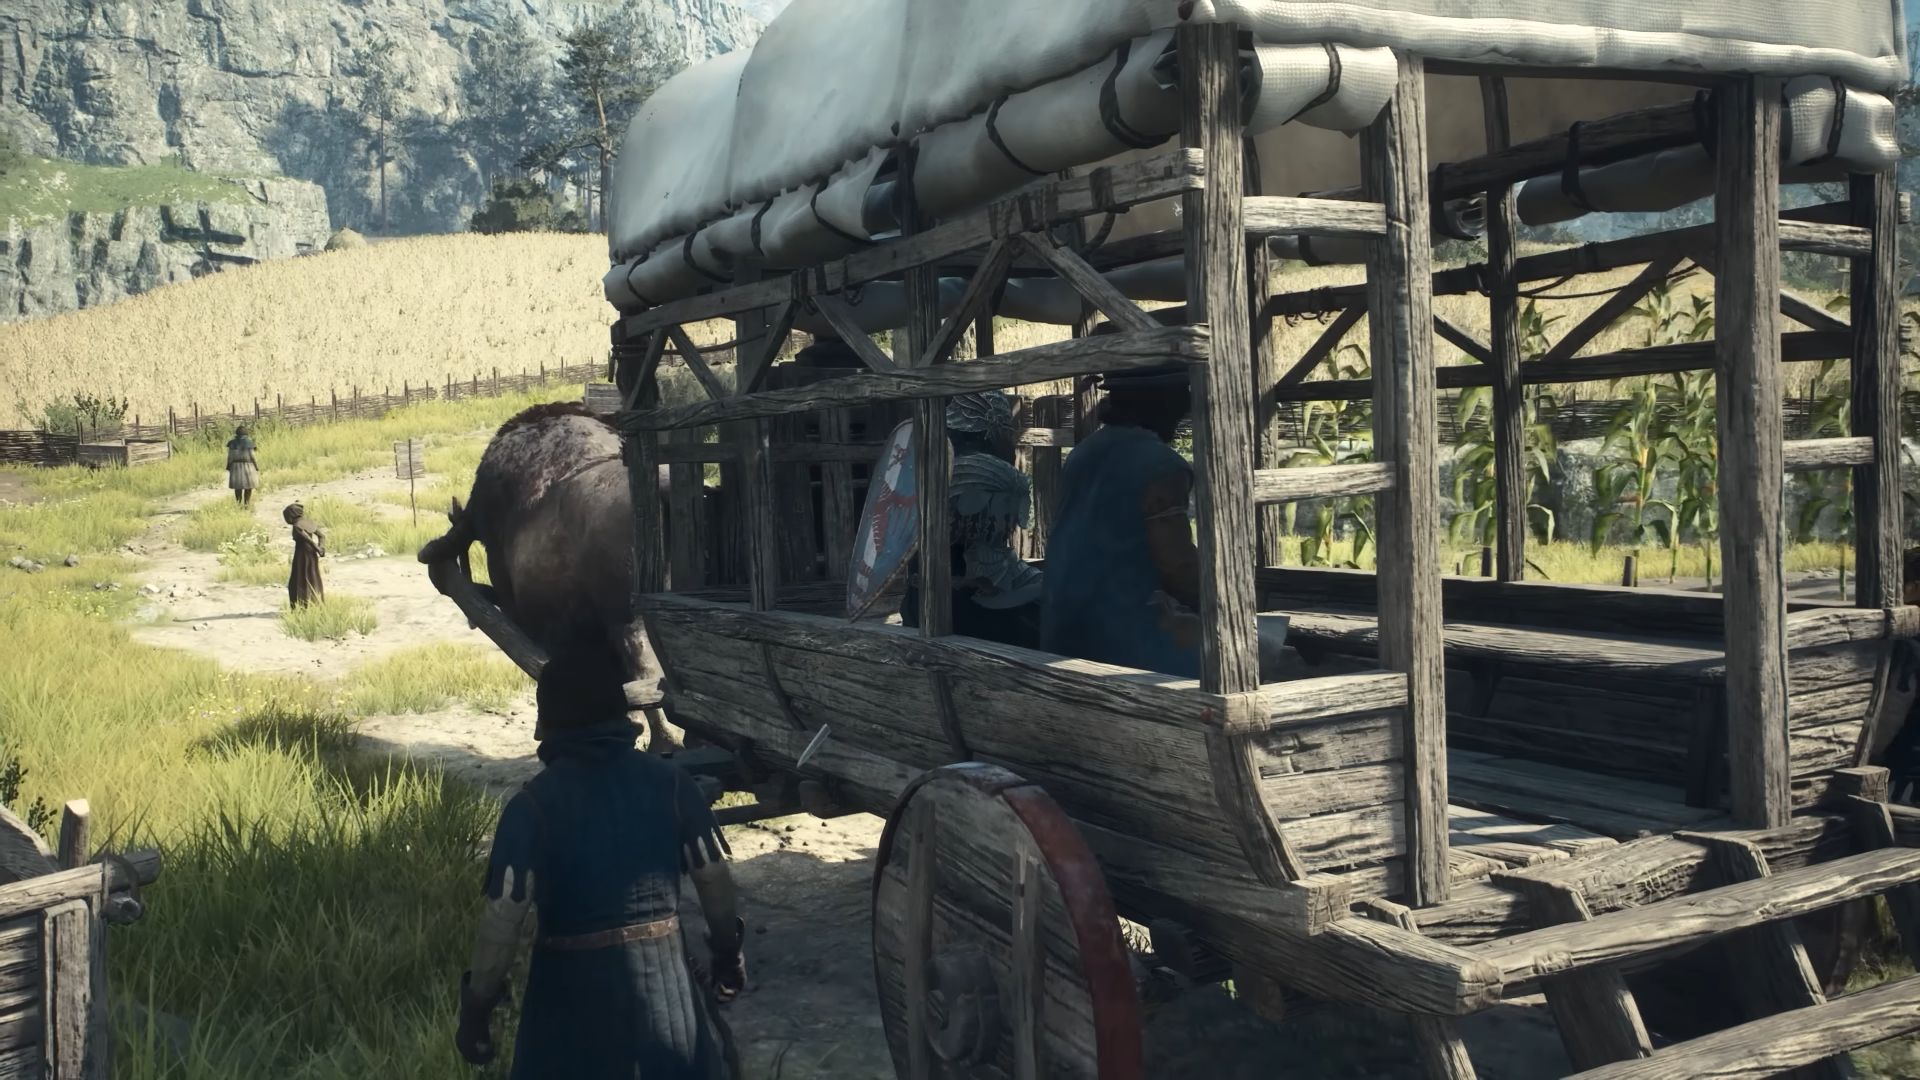 The Ox Cart fast travel system in Dragon's Dogma 2